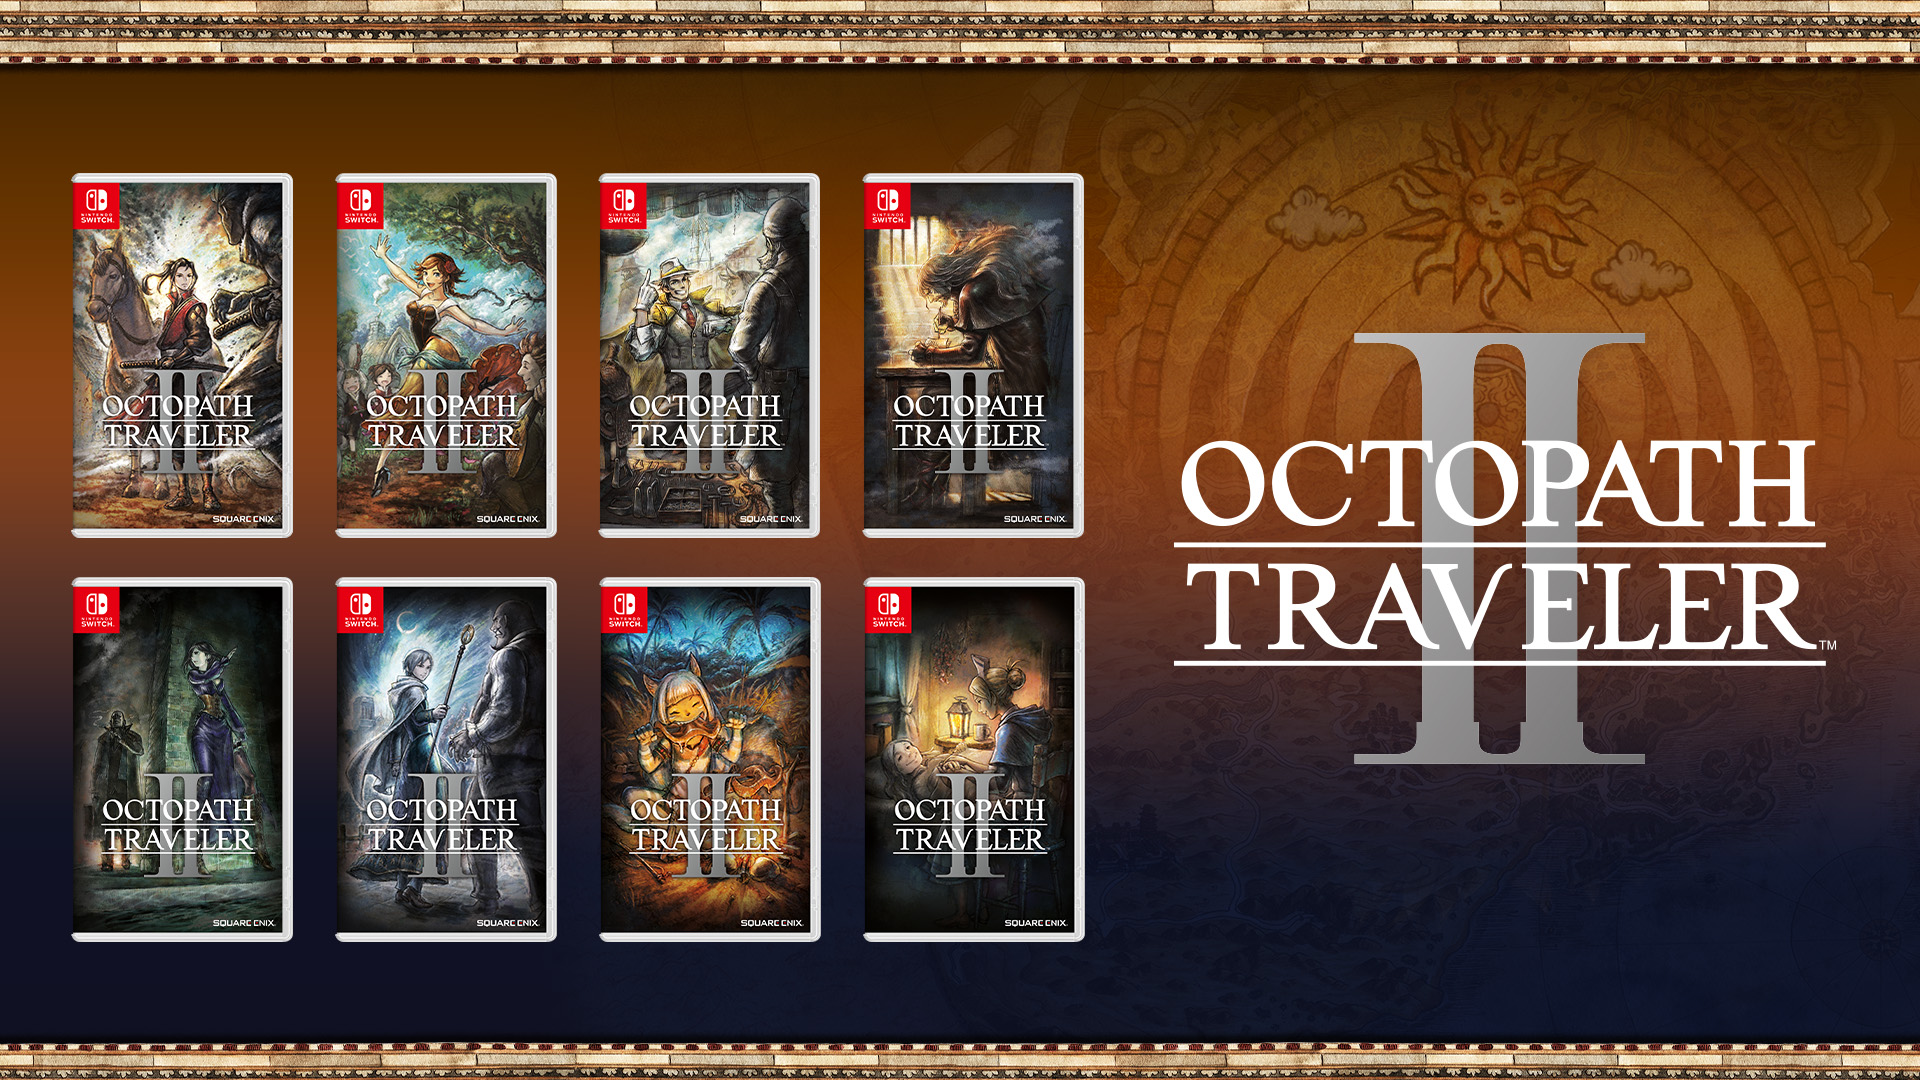 OCTOPATH TRAVELER II available now for Nintendo Switch